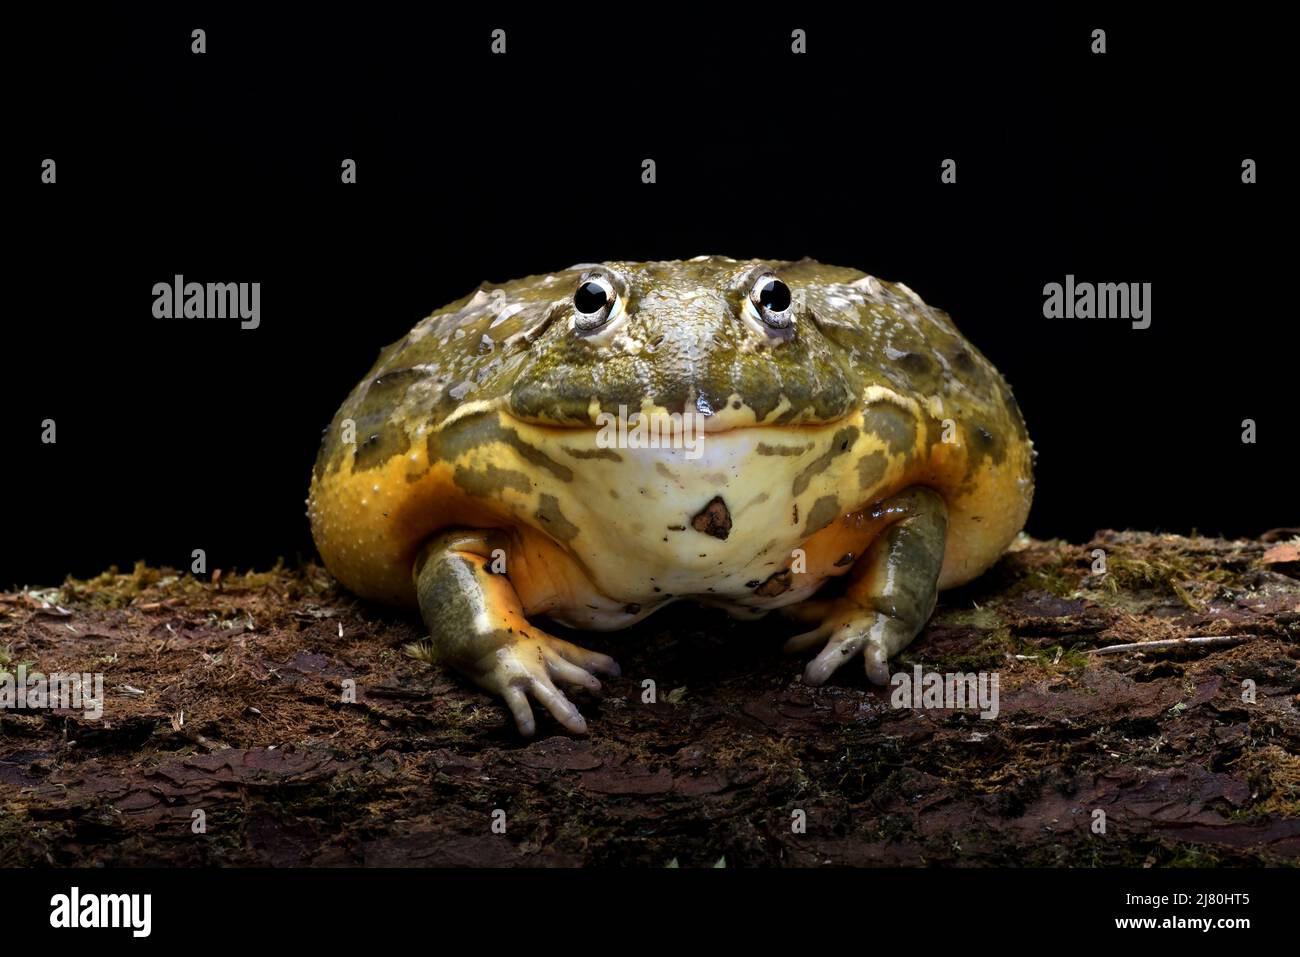 Portrait of an African bullfrog on wood, Indonesia Stock Photo